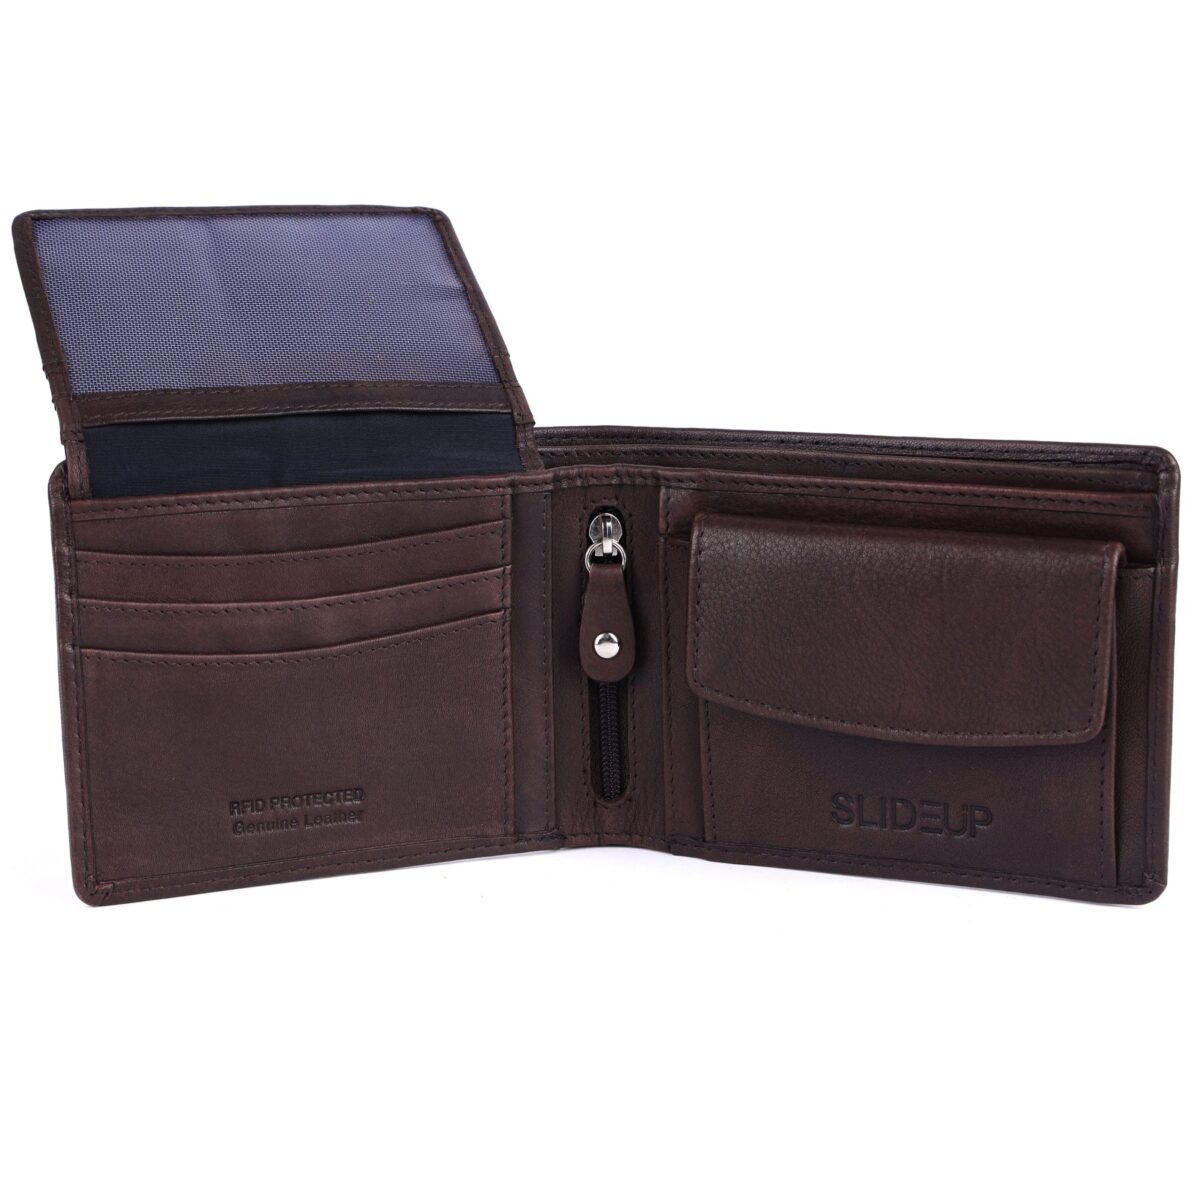 Buy Leather Bags Wallets